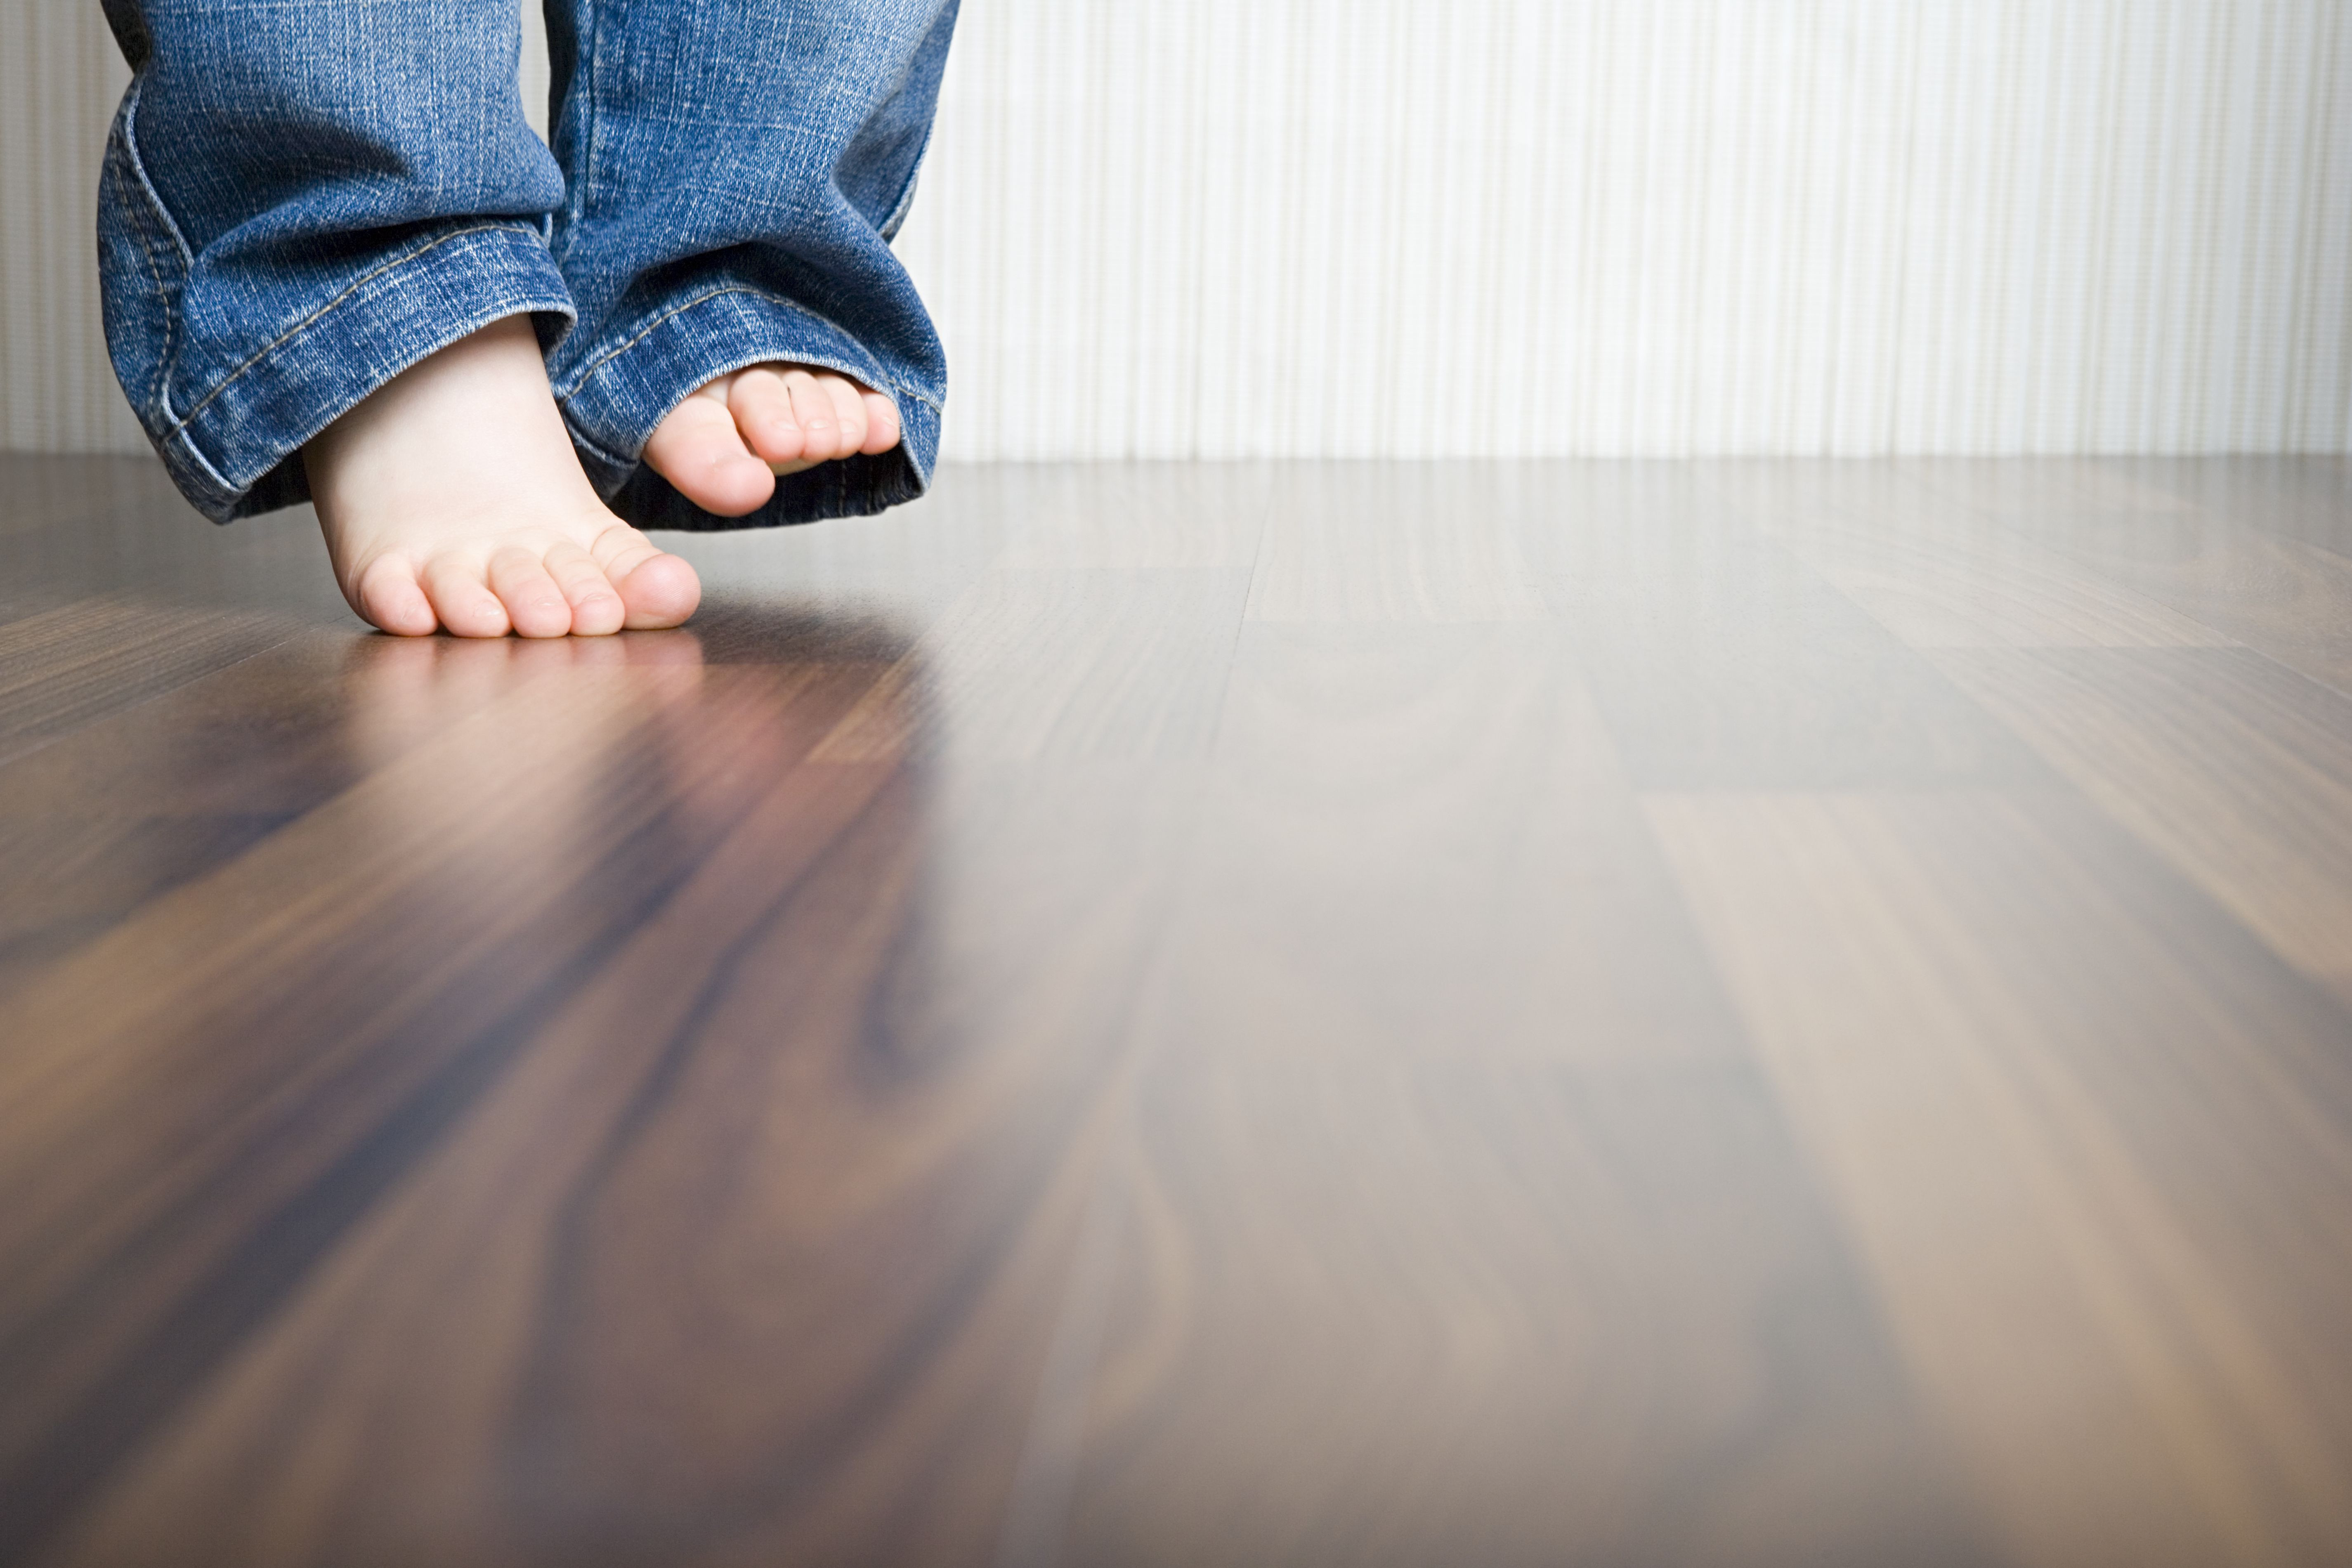 Hardwood Flooring Cost Uk Of How to Clean Hardwood Floors Best Way to Clean Wood Flooring Throughout 1512149908 Gettyimages 75403973